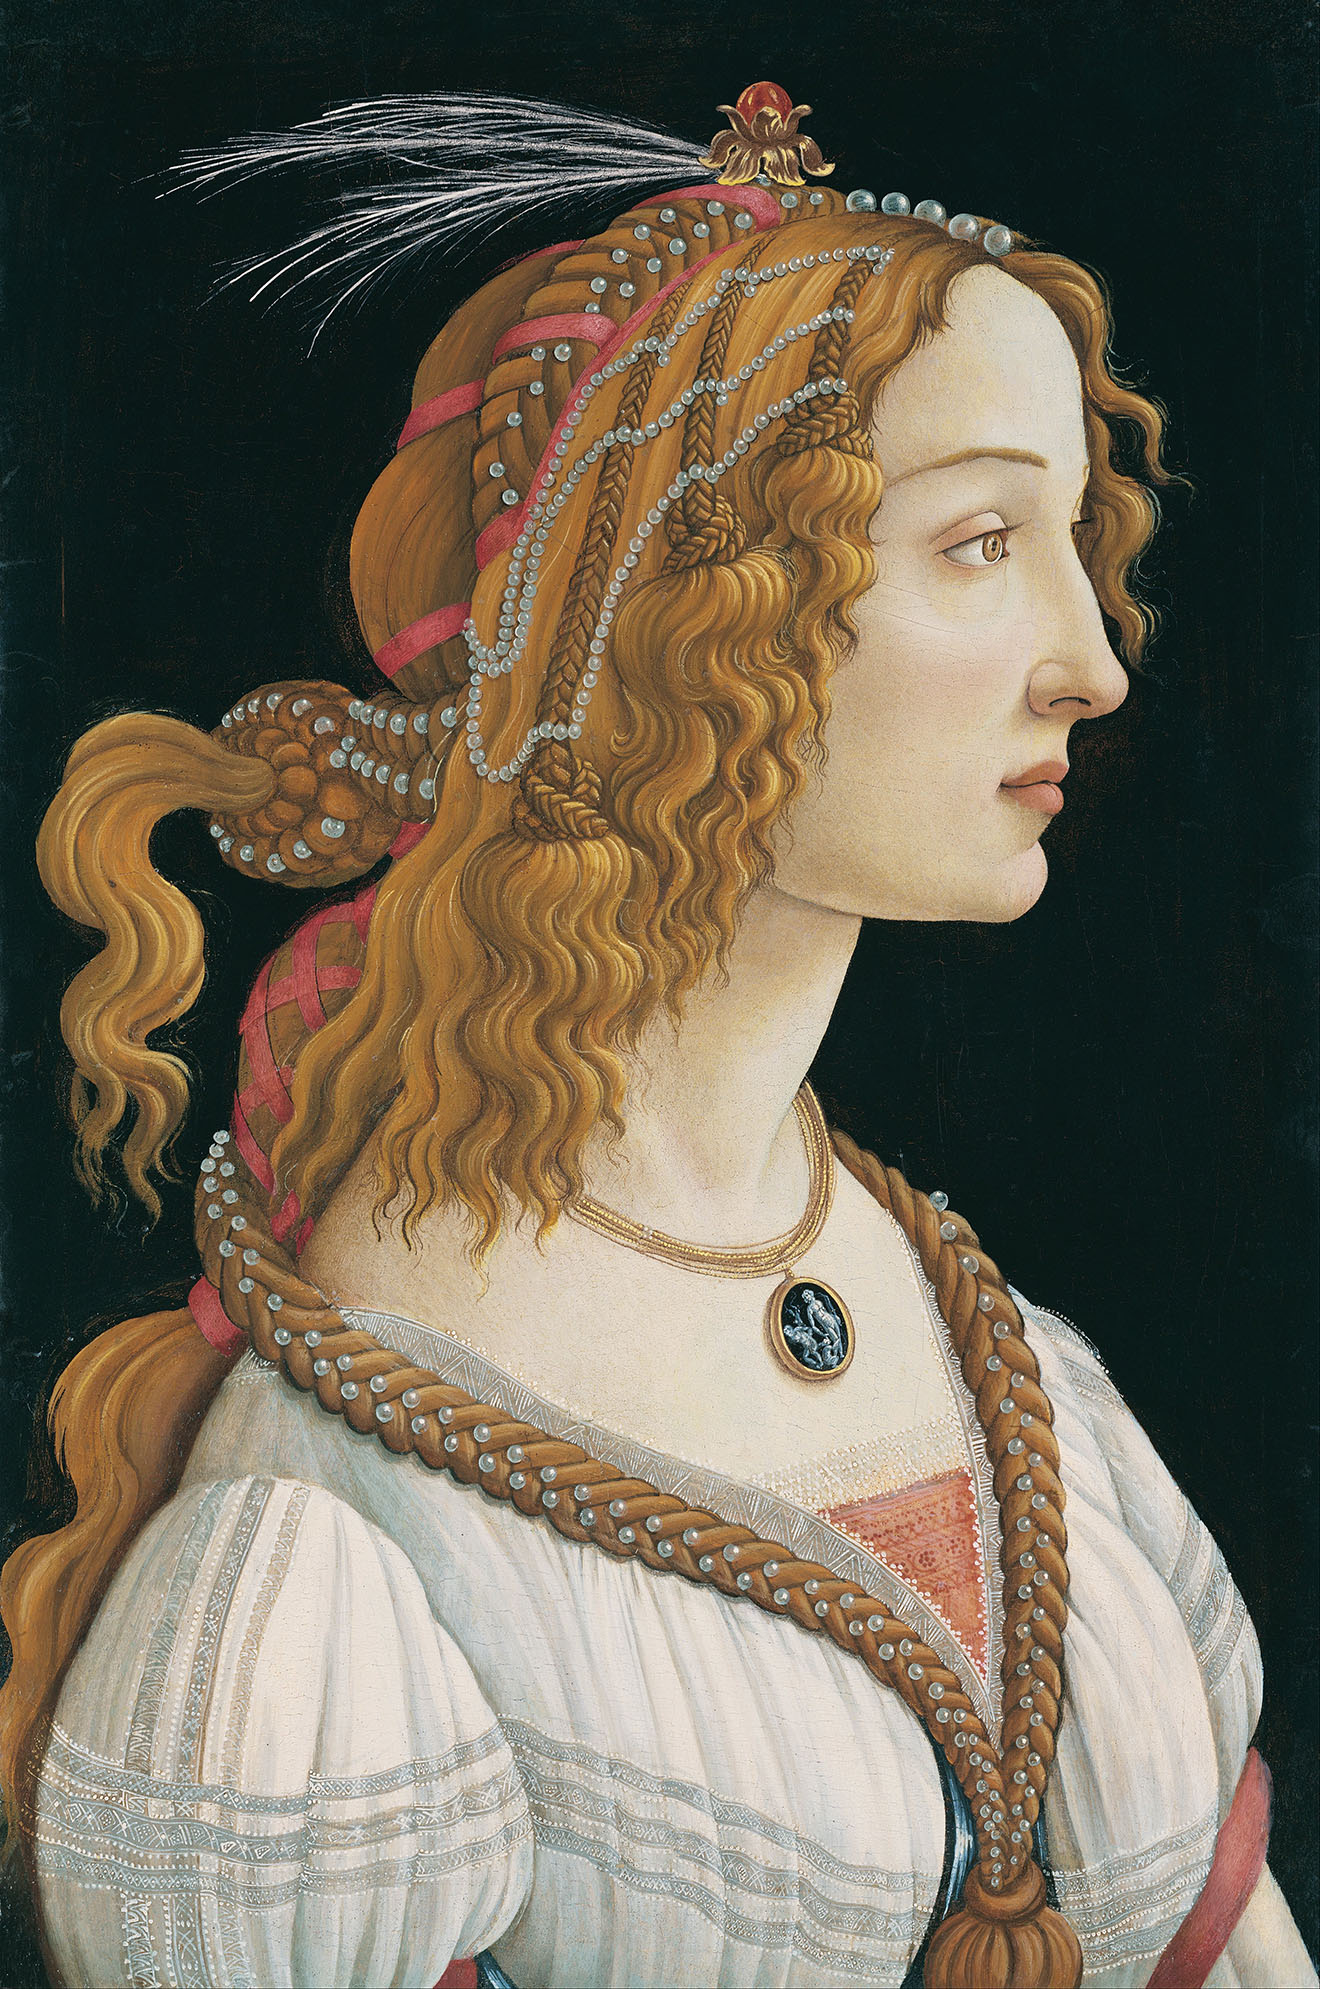 The original Portrait of a Young Lady, thought to be Simonnetta Vespucci by Sandro Botticelli